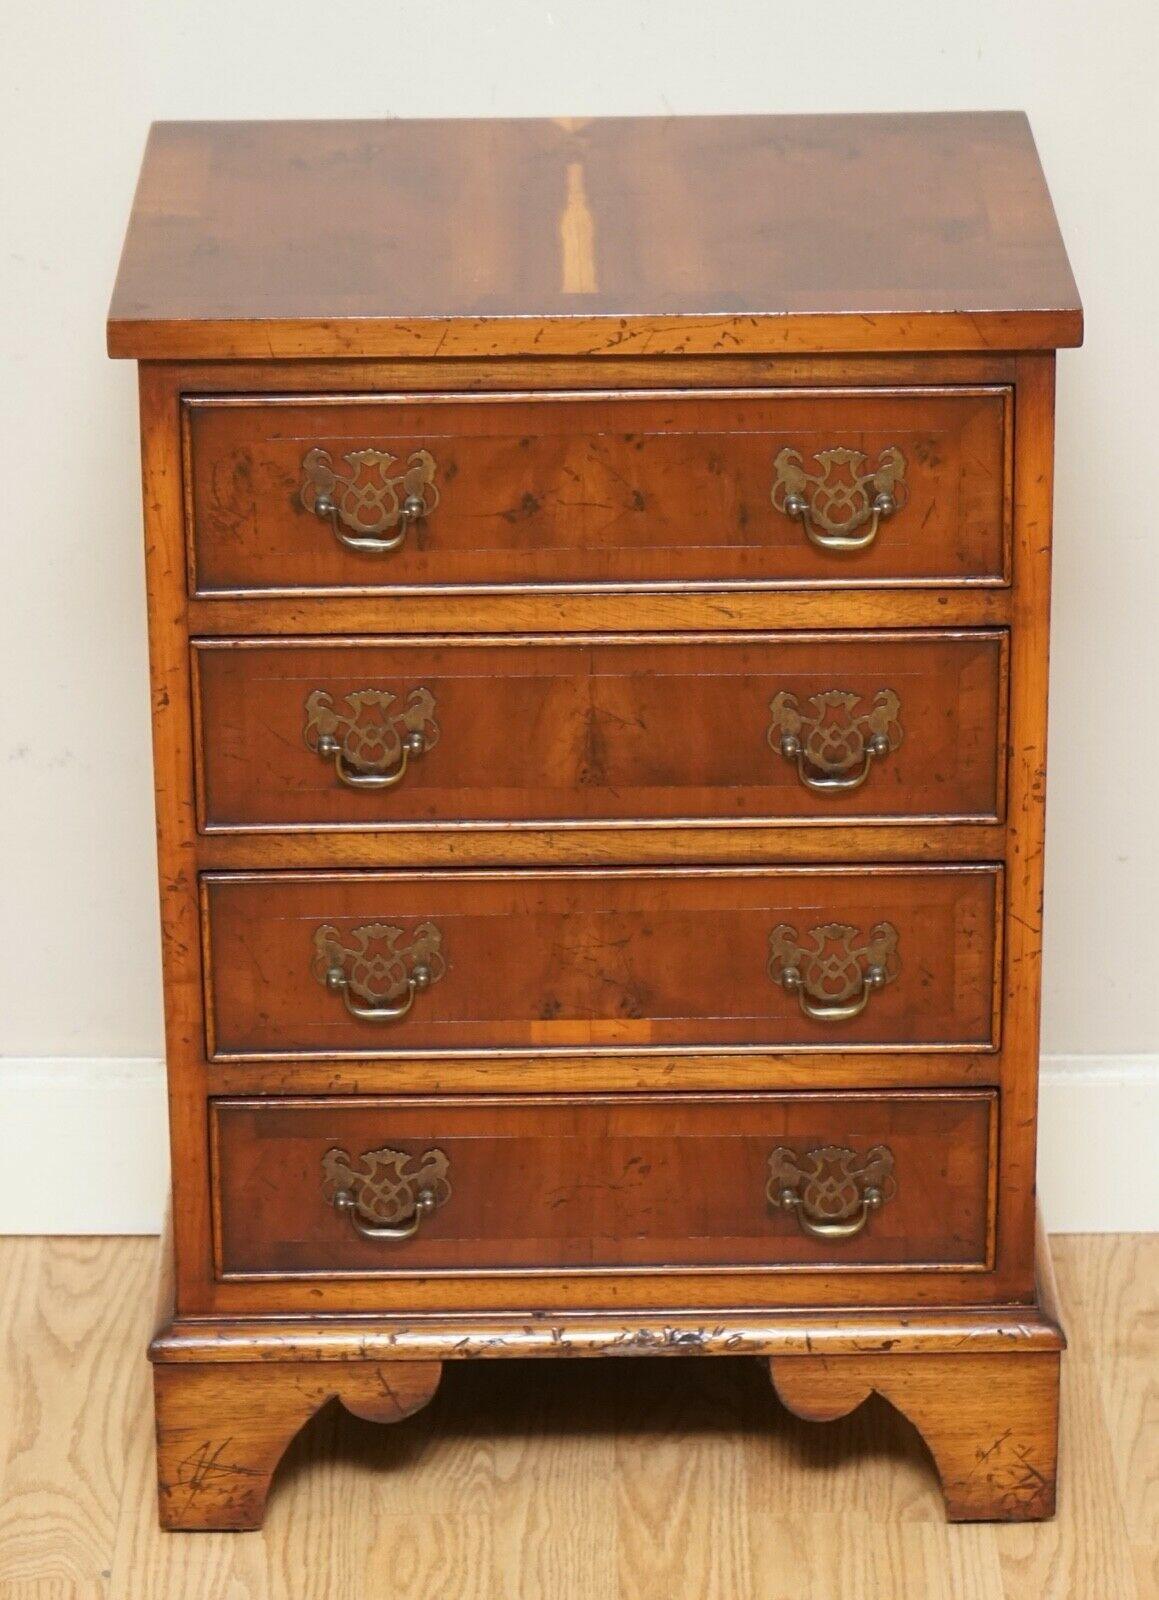 We are delighted to offer for sale this Stunning Distressed Georgian Style Yew Wood Small Chest of Drawers. 

Very lovely little chest can be used as a bedside table or anywhere around the home.

We have lightly restored this by hand cleaning